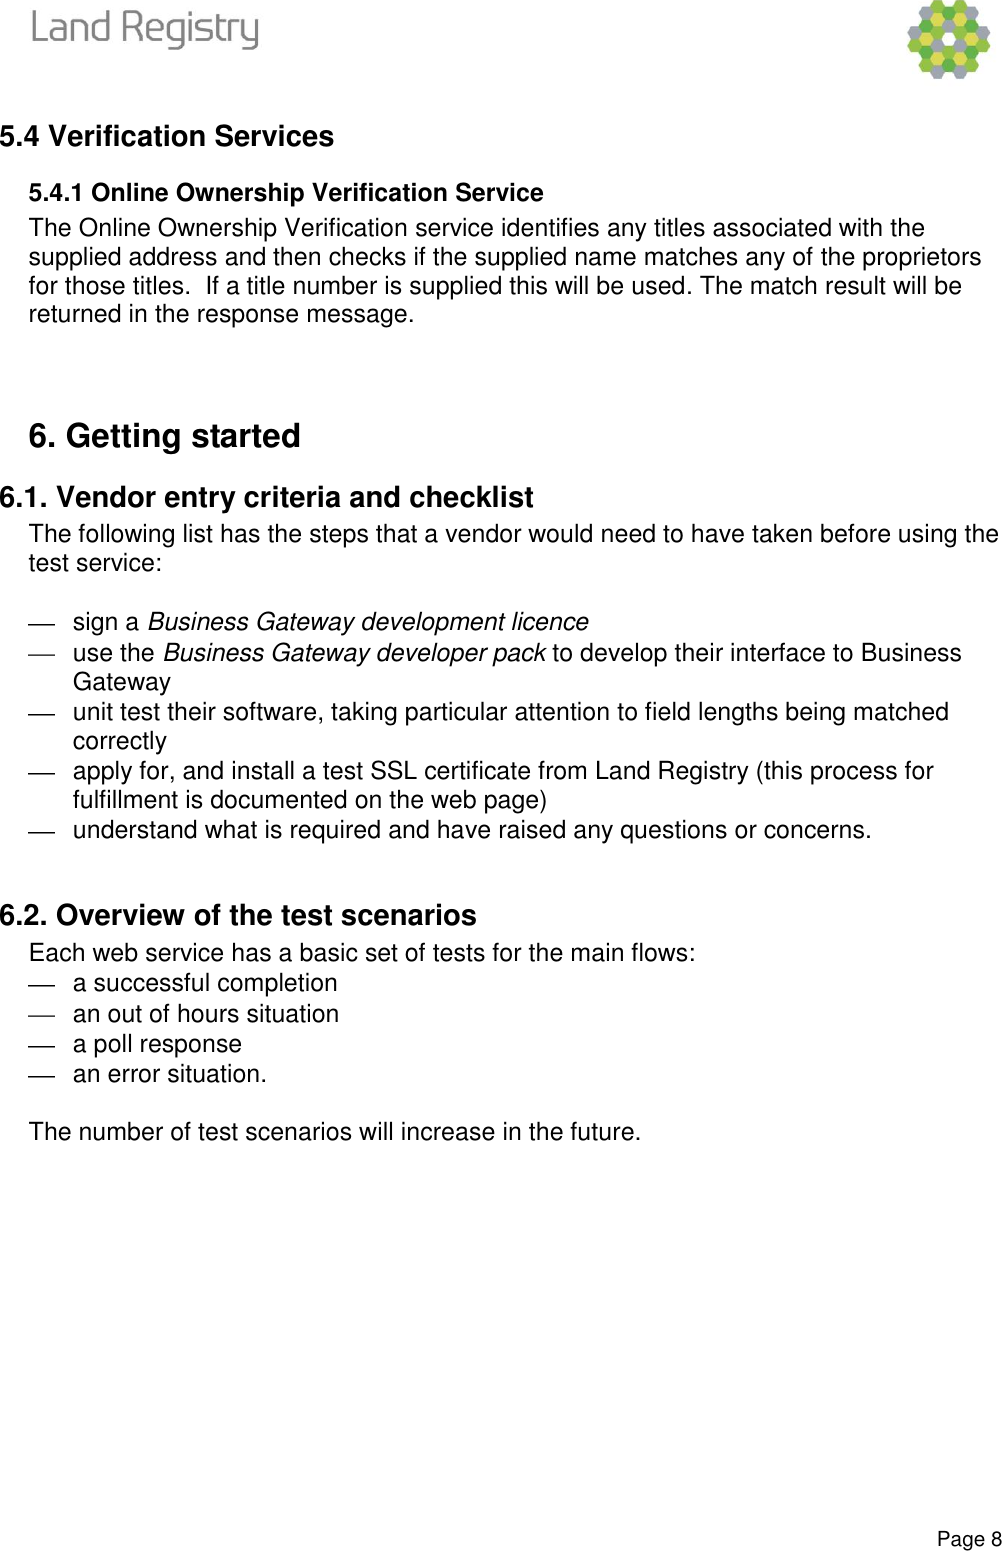 Page 8 of 8 - Business-gateway-vendor--guide